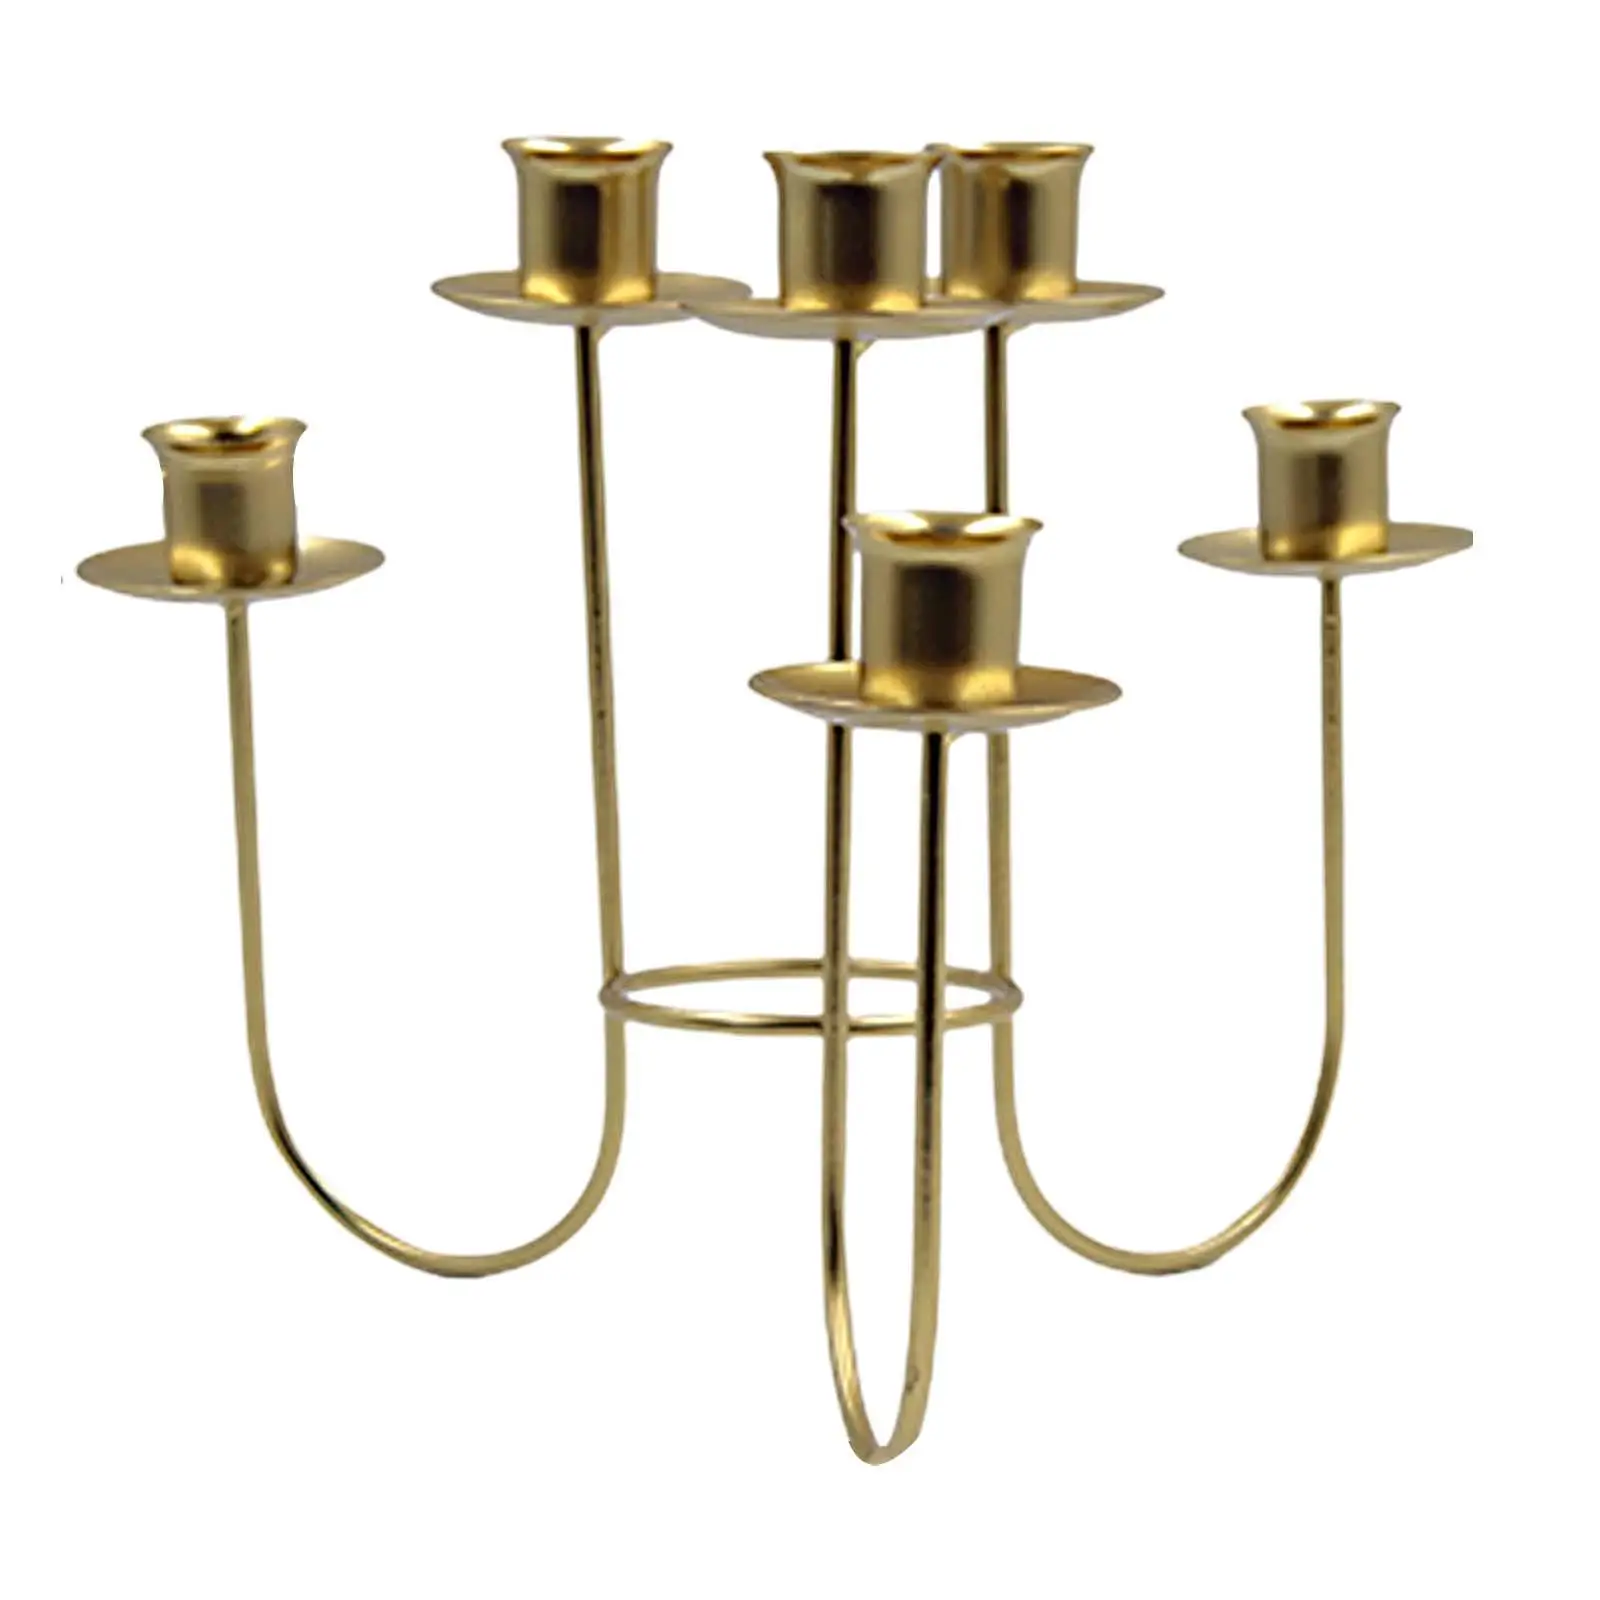 Multi Arms Metal Candle Holder Candle Stand 10x8inch for Festive Party Decor